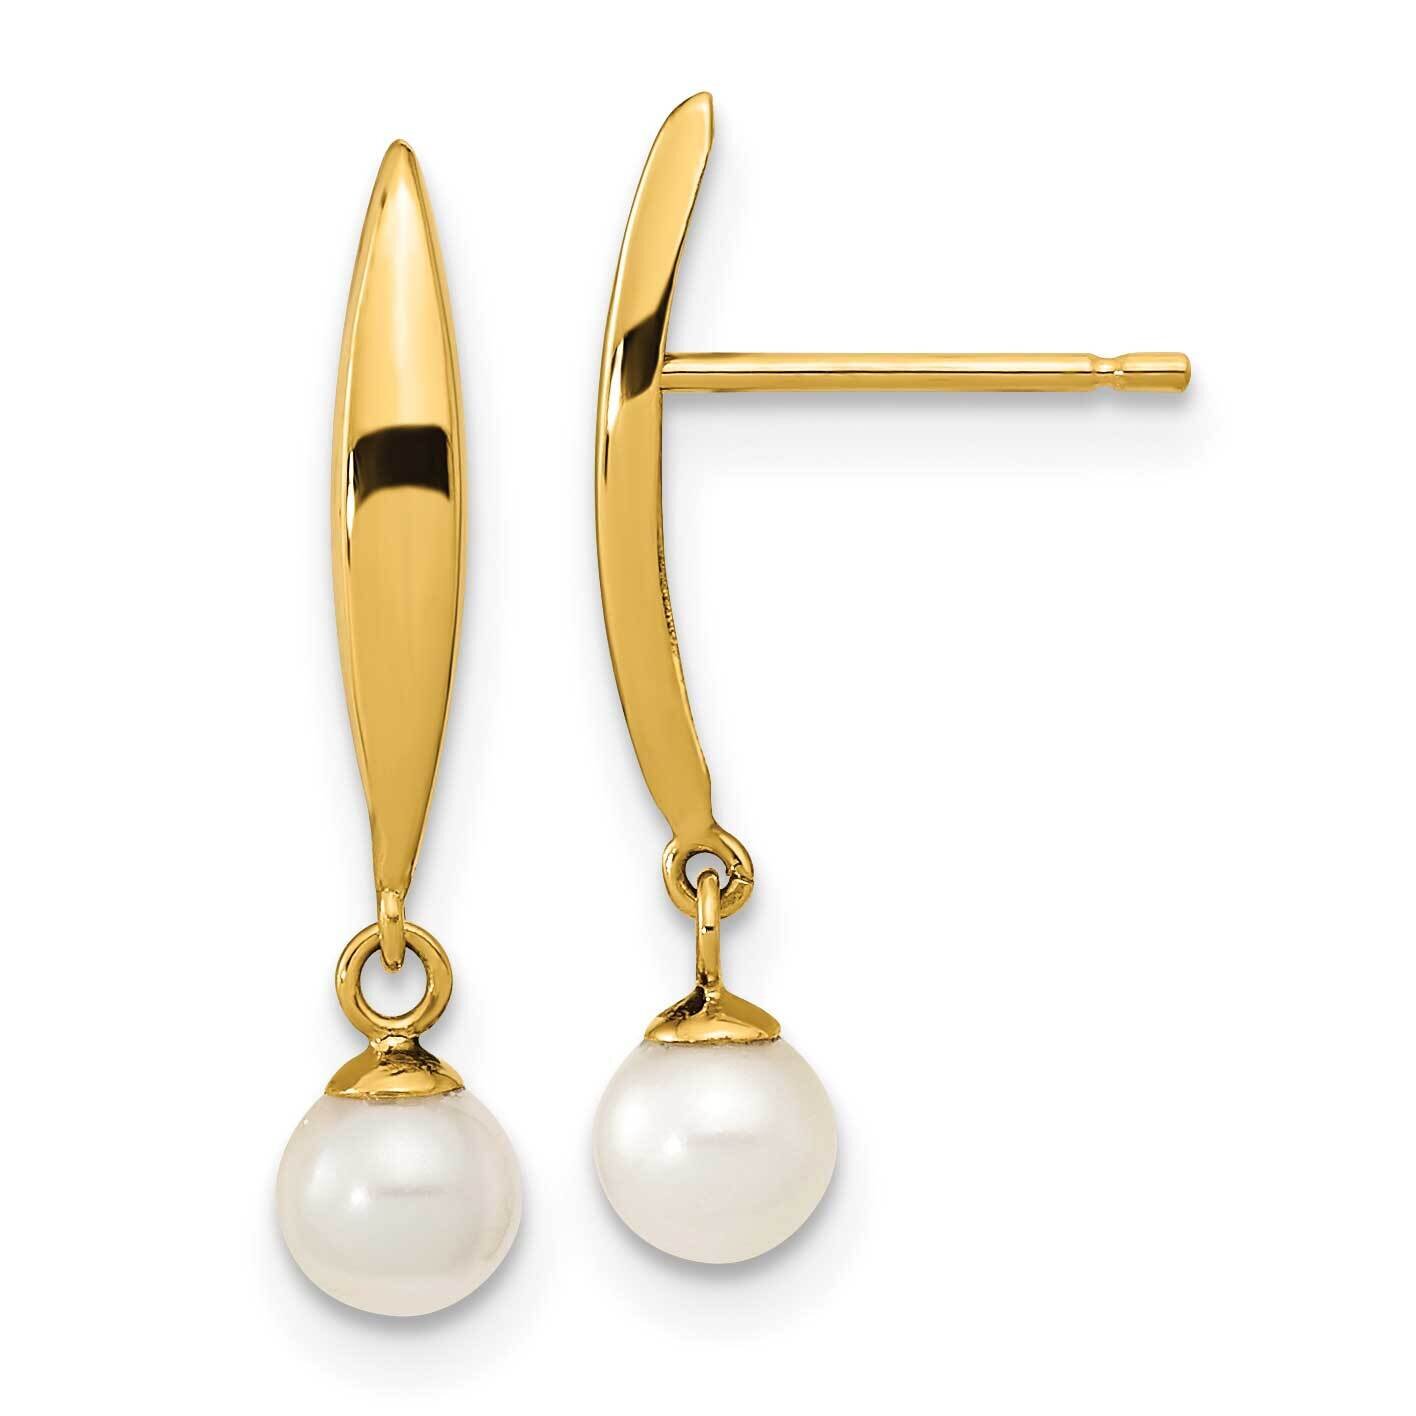 4mm Freshwater Cultured Pearl Post Earrings 14k Gold Polished SE3042